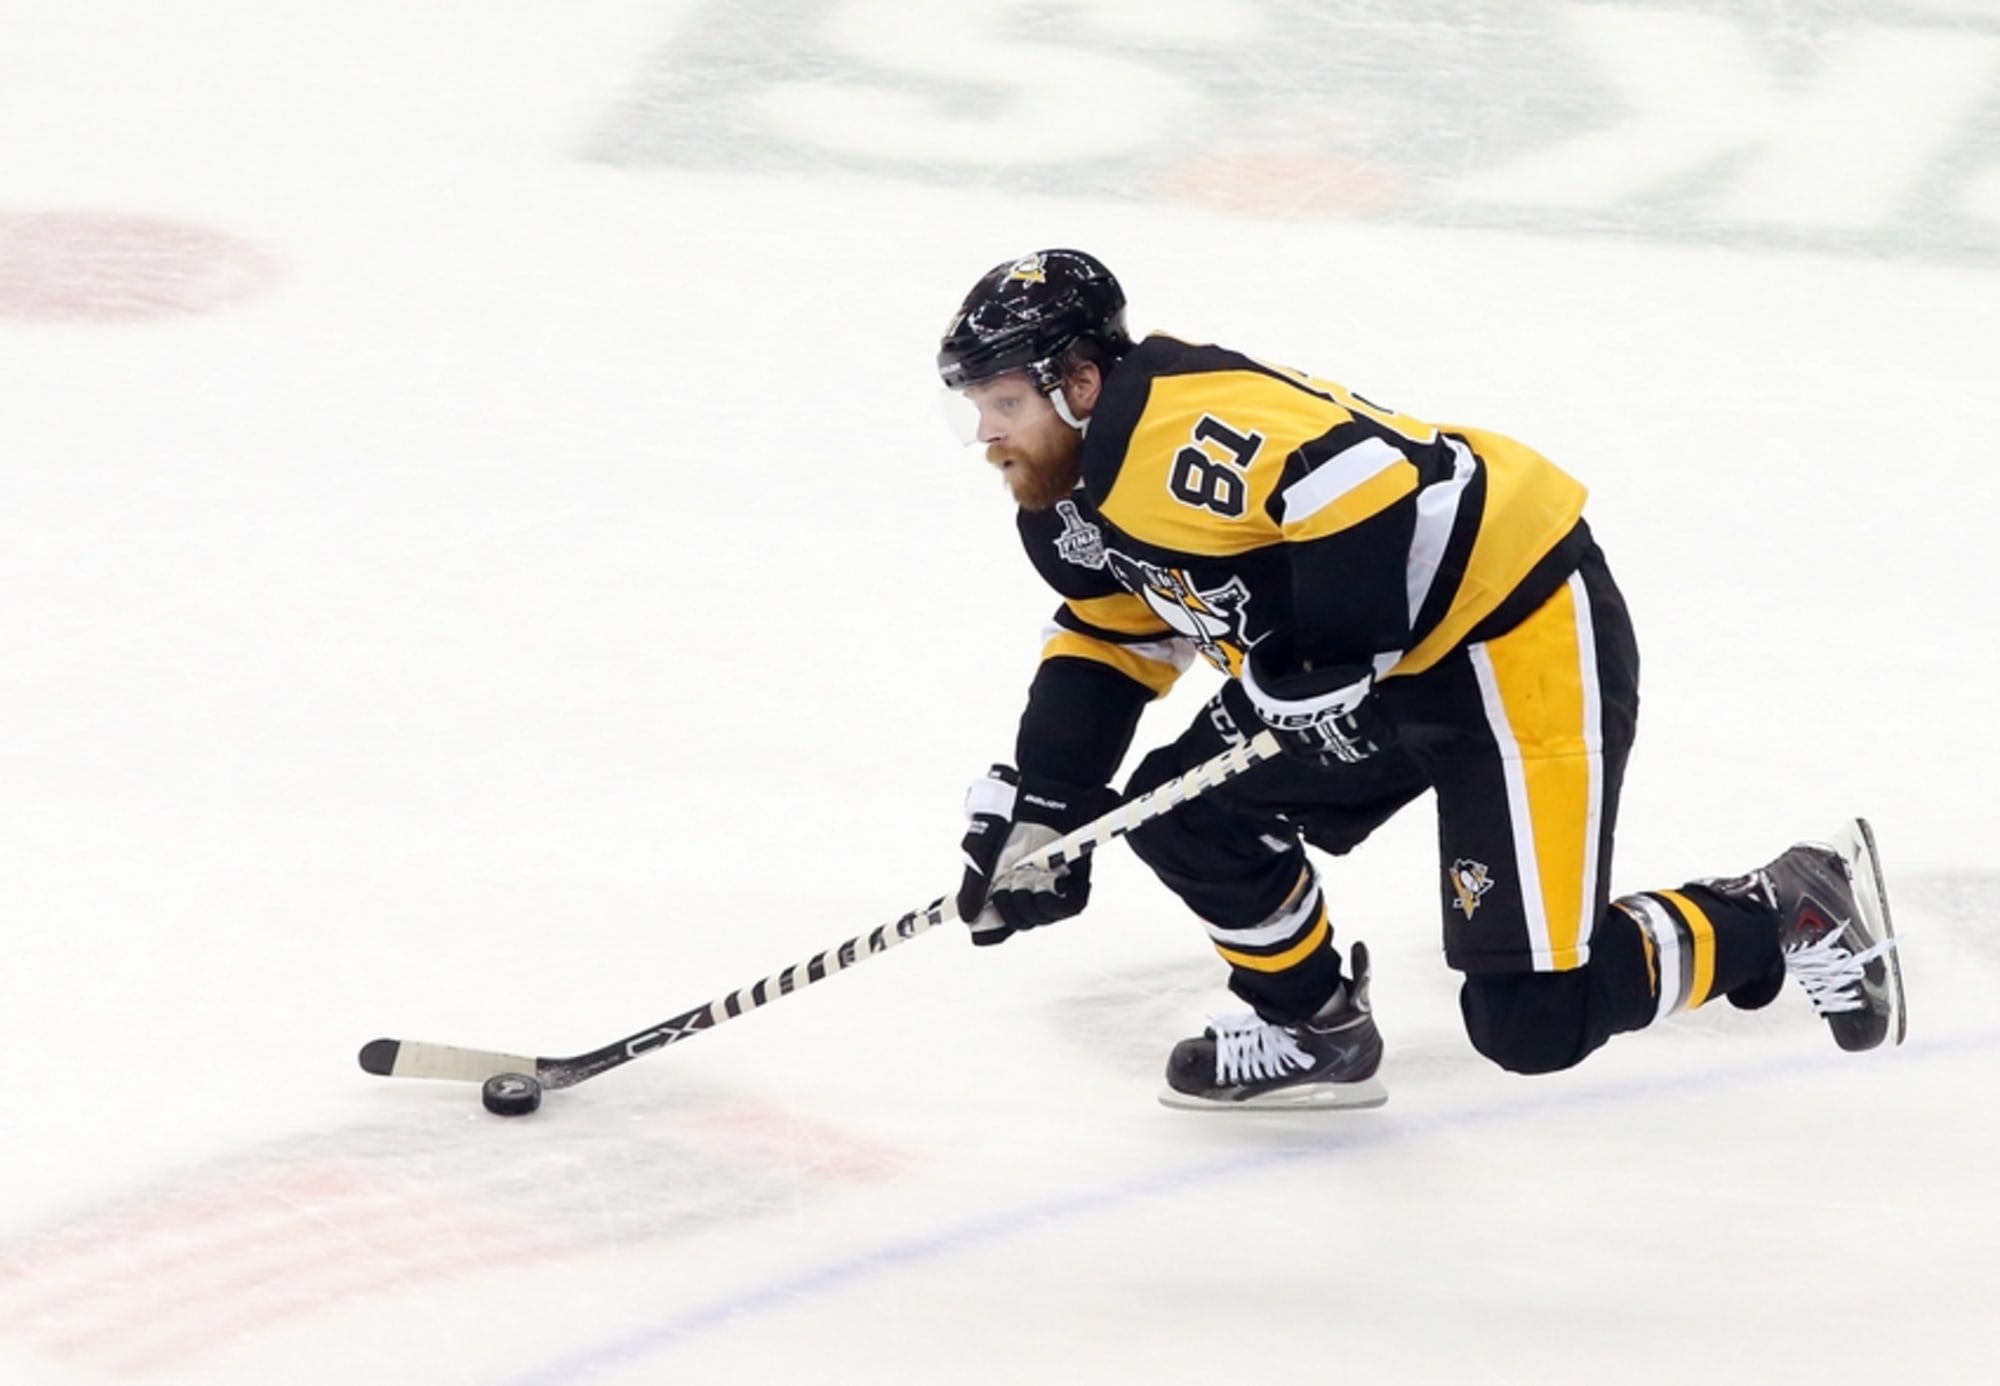 Pittsburgh Penguins: Let's Talk About Phil Kessel